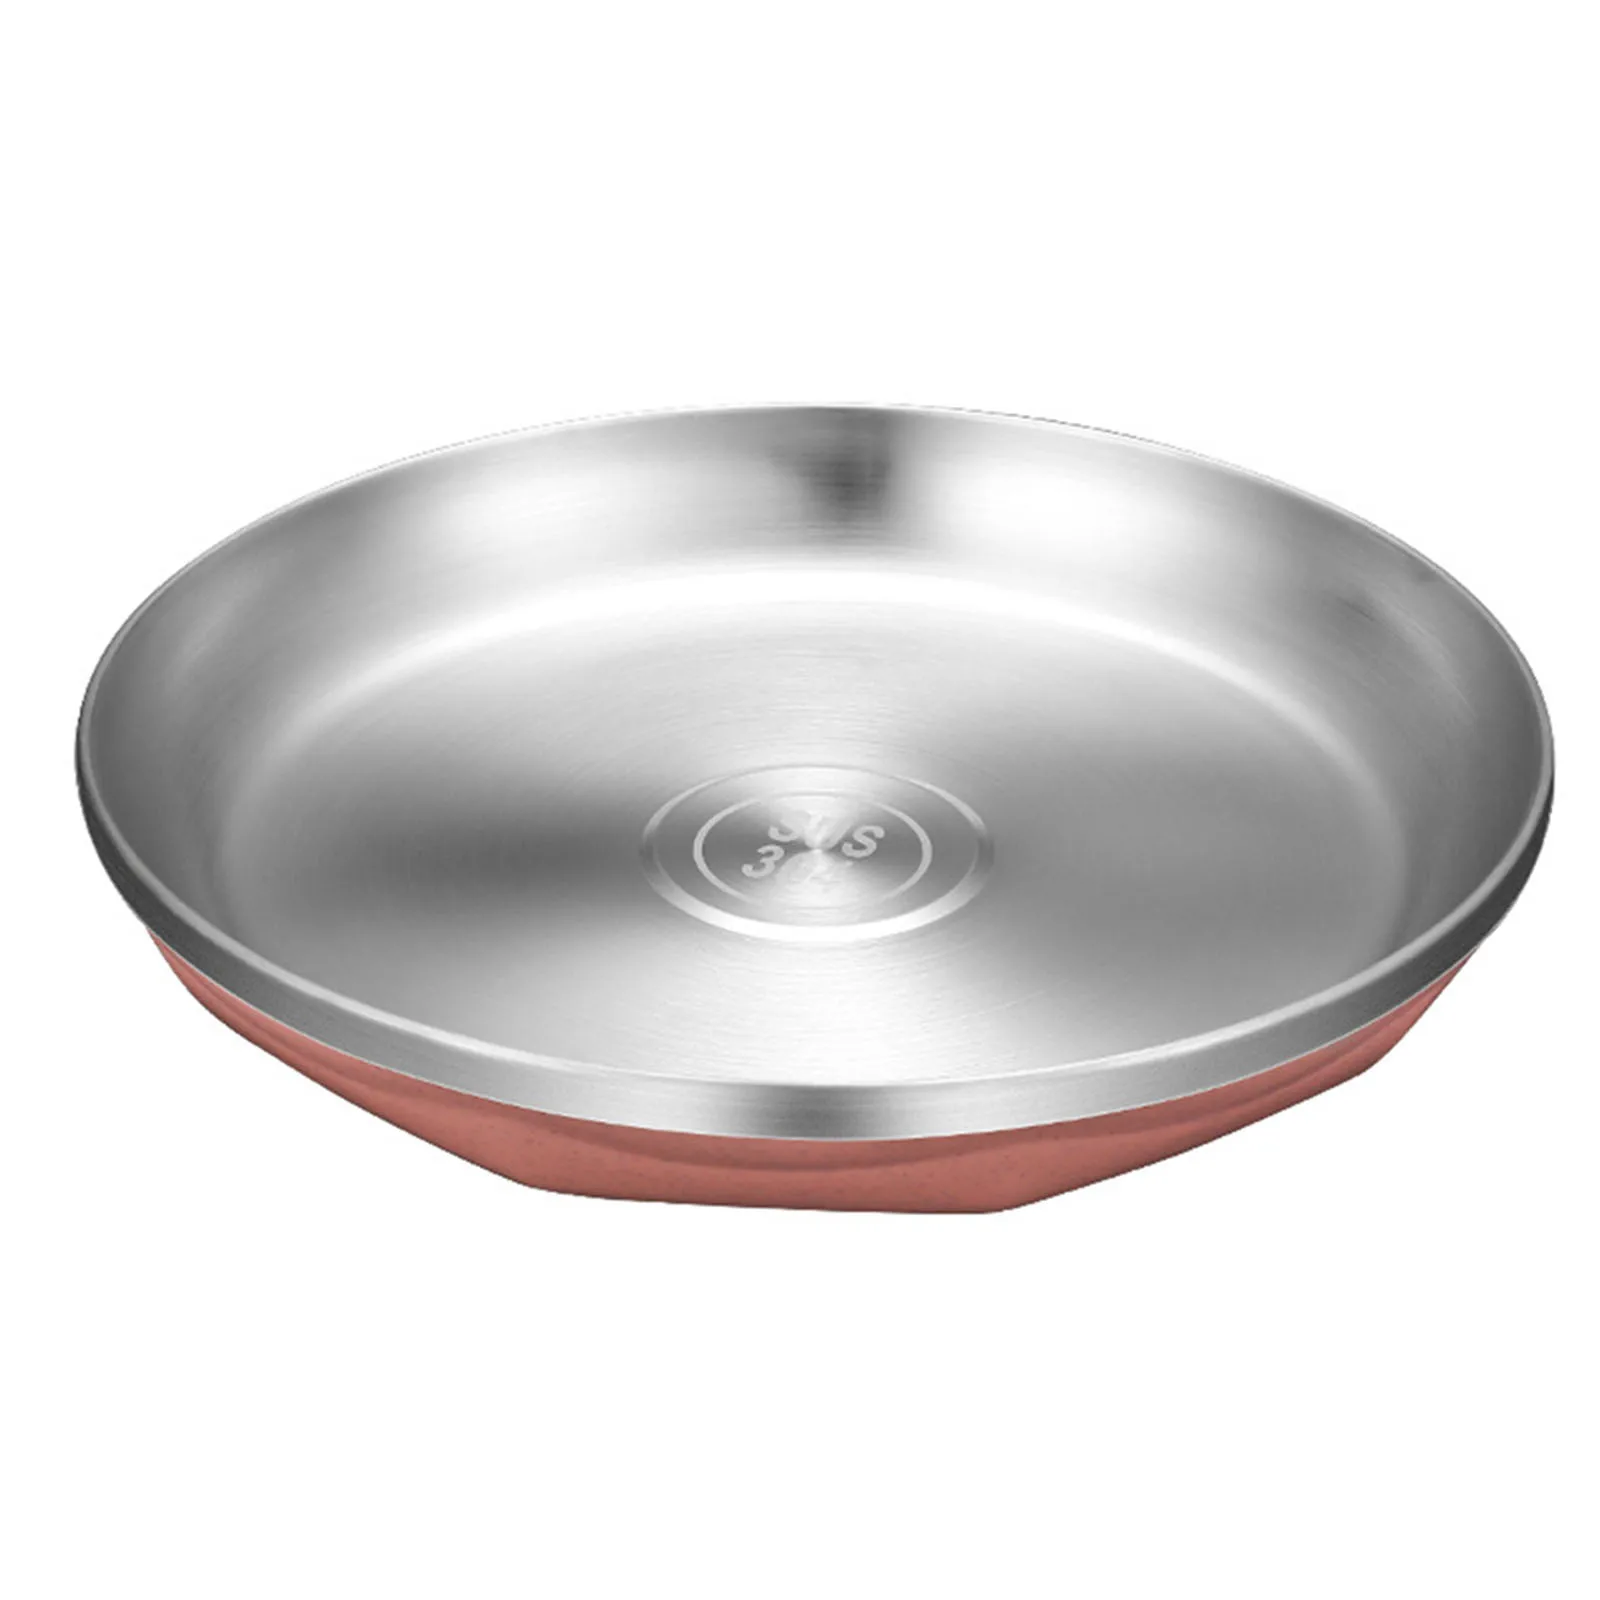 

20CM Stainless Steel Round Dinner Plate Dessert Feeding Serving Dishware Barbecue Tray Salad Steak Plate Dish Plate Wholesale